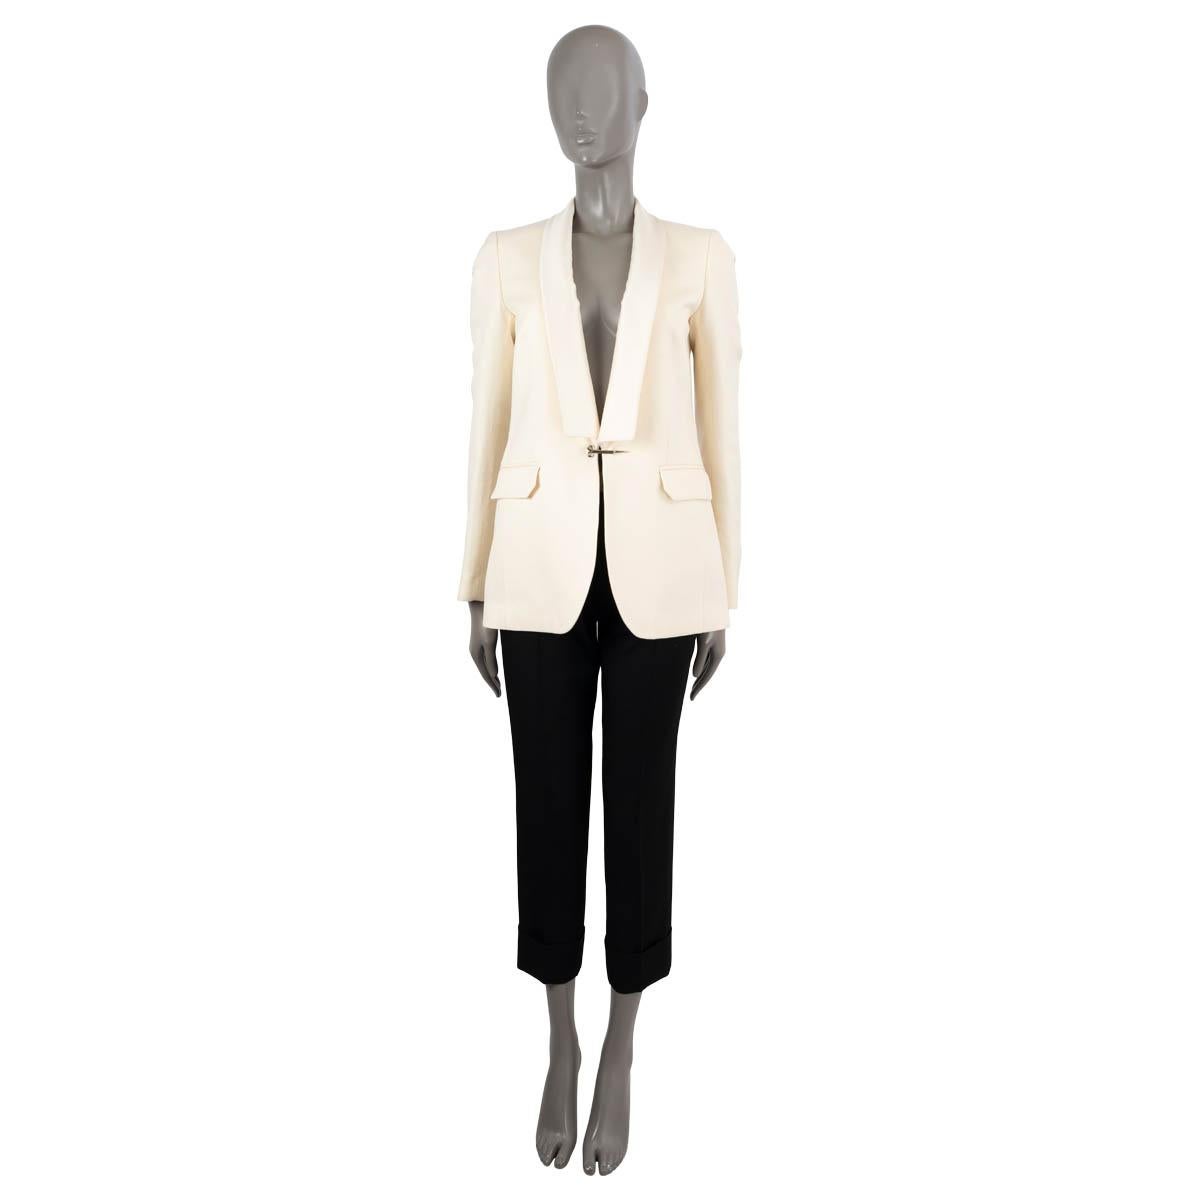 100% authentic Bally shawl collar tuxedo blazer in ivory wool (84%) and silk (16%). Features a satin lapel, two flap pockets and buttoned cuffs. Closes with one silver hook on the front. Lined in cupro (100%). Has been worn and is in excellent